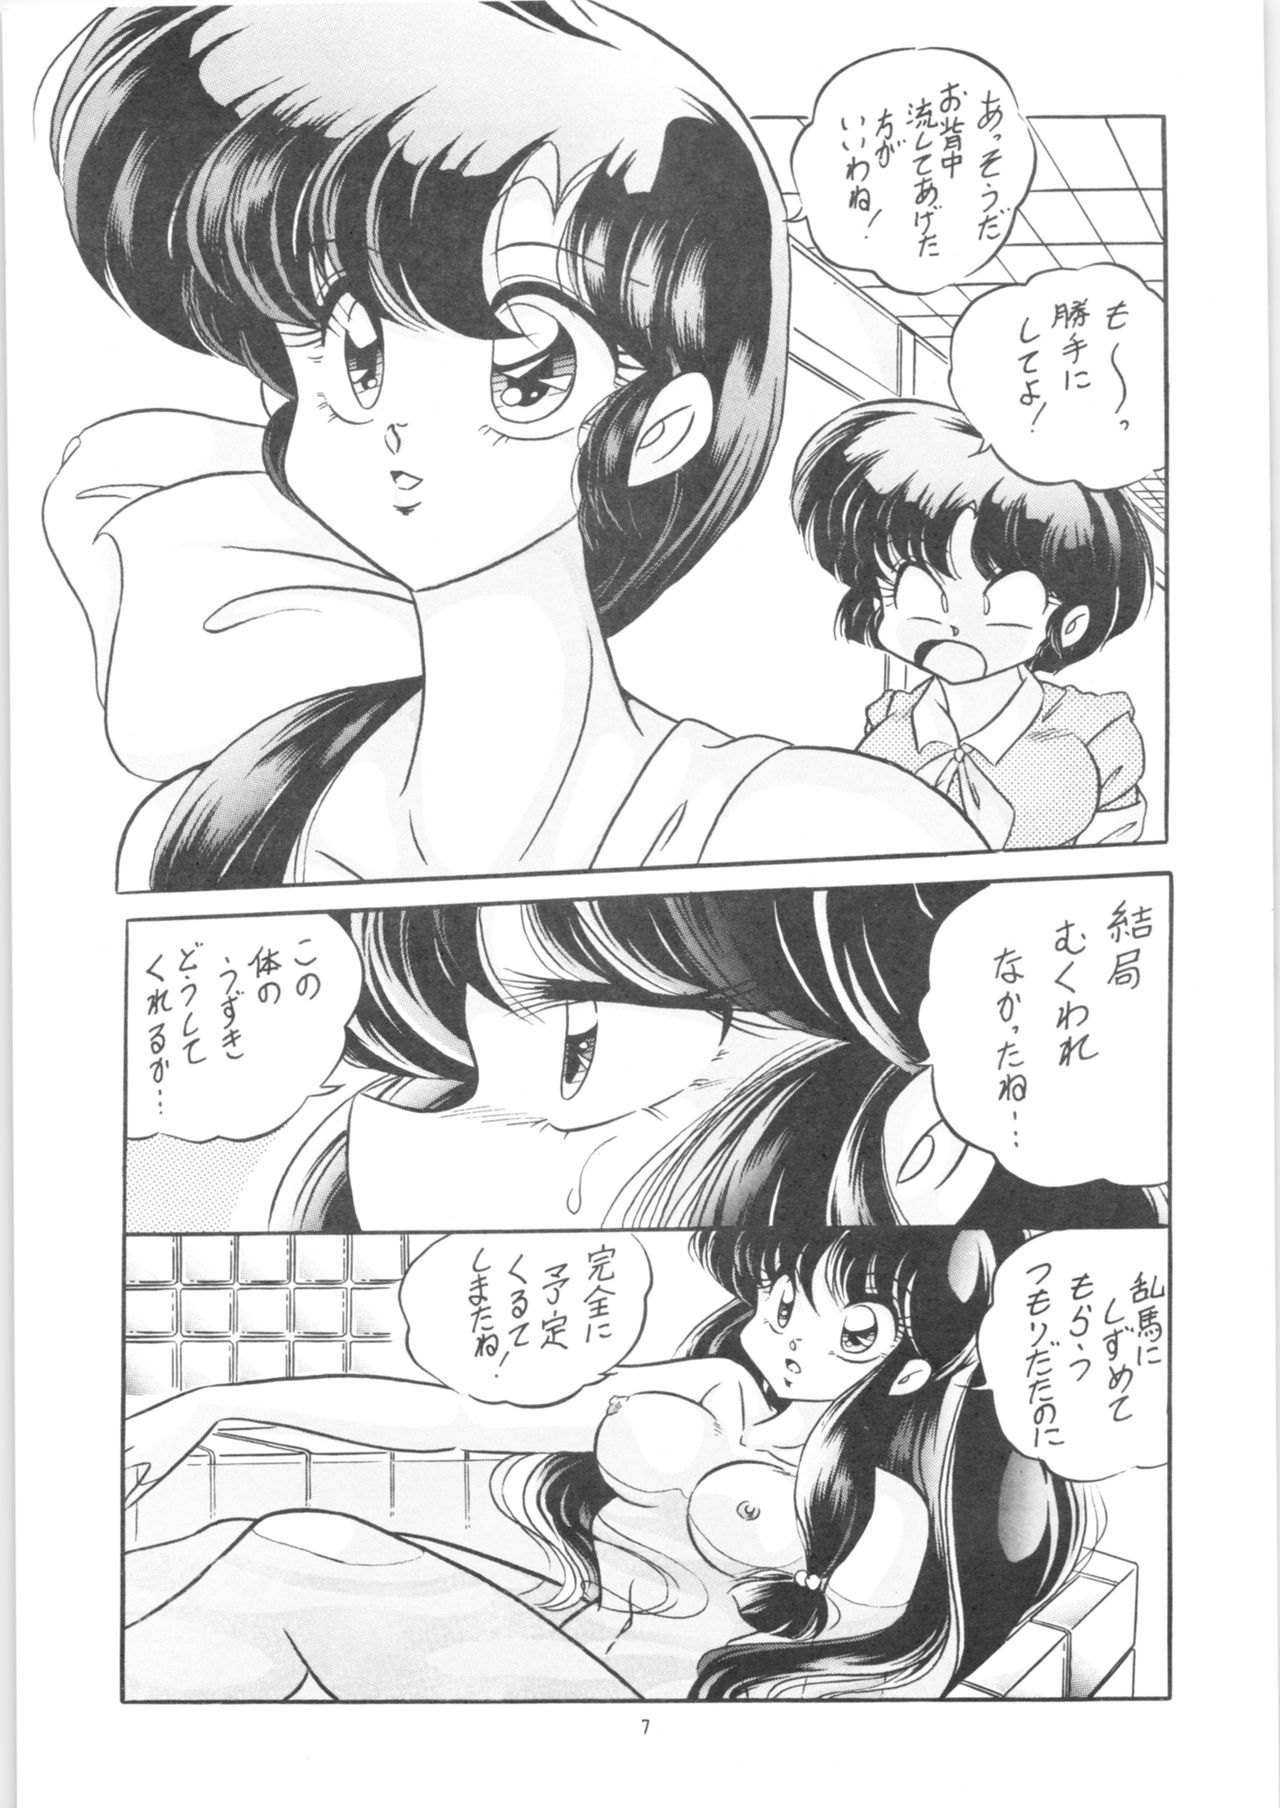 [C-COMPANY] C-COMPANY SPECIAL STAGE 13 (Ranma 1/2) page 8 full